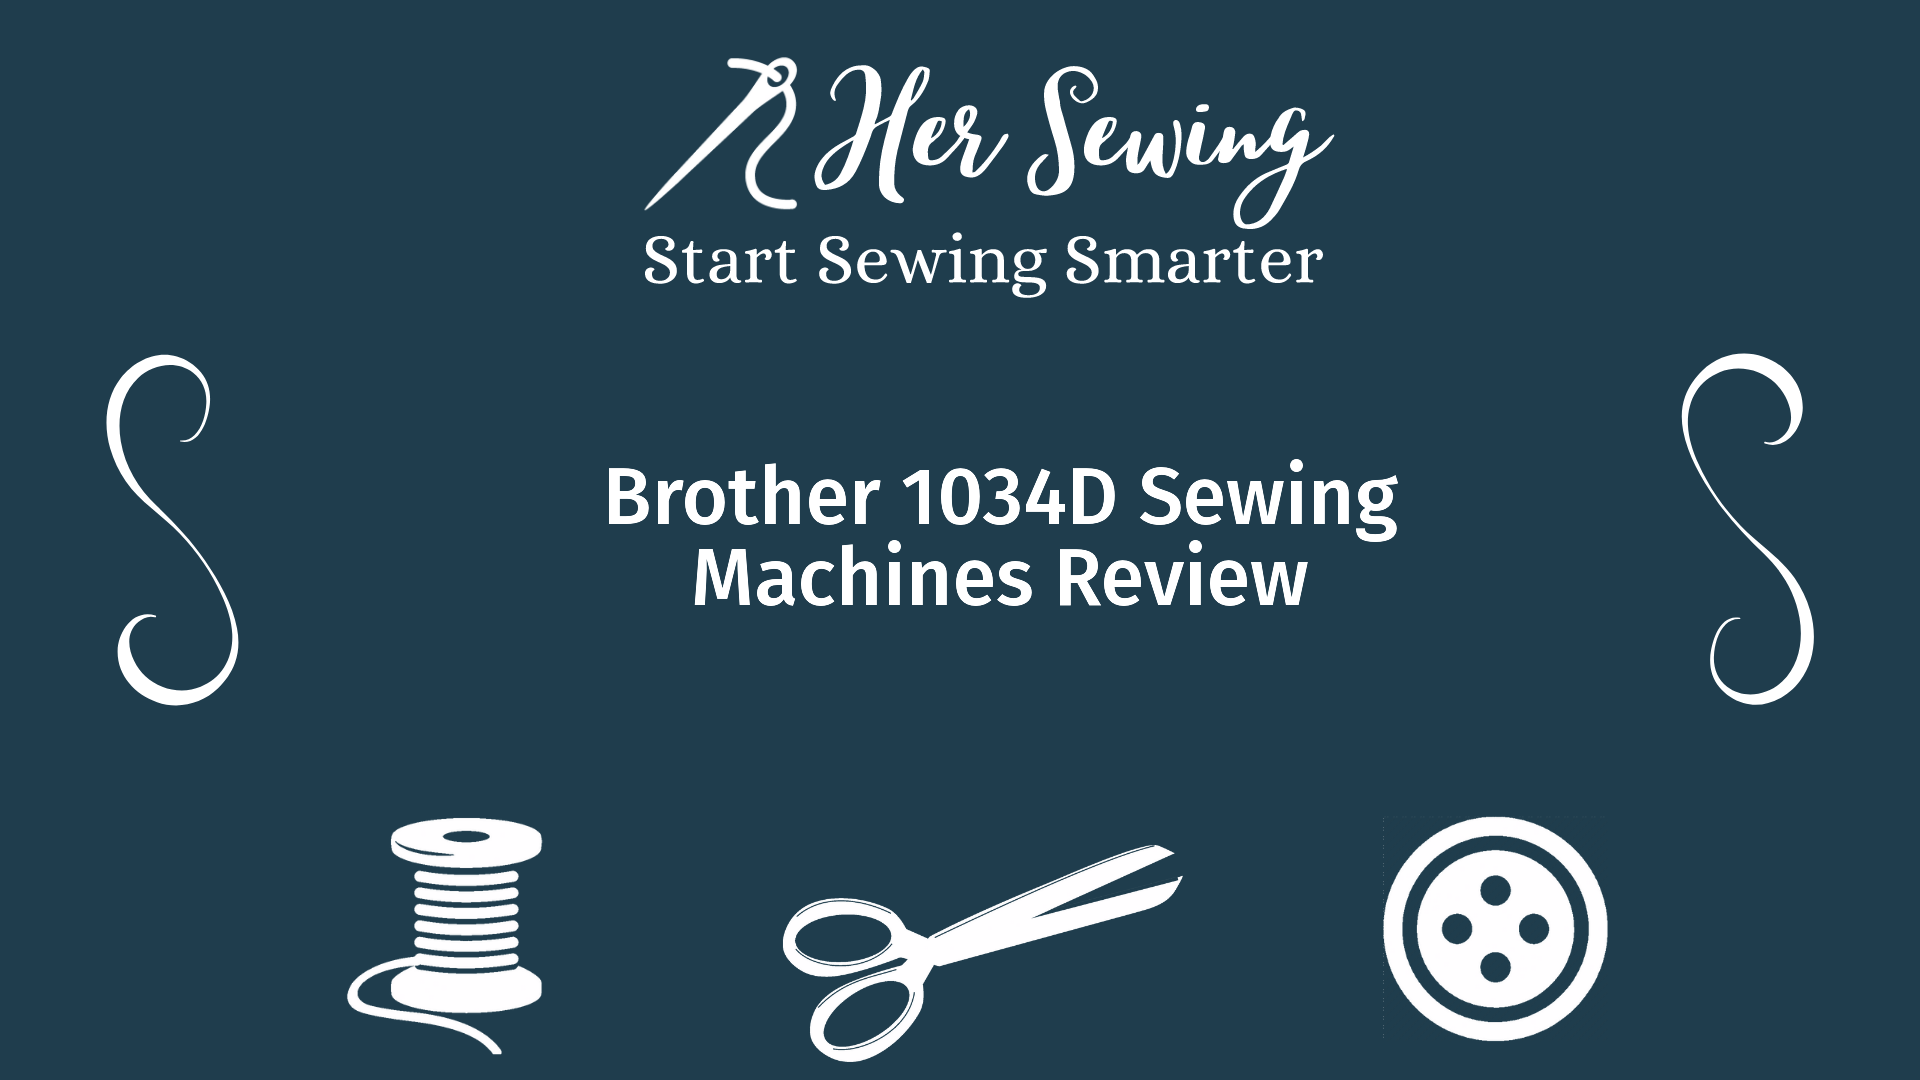 Brother 1034D Sewing Machines Review